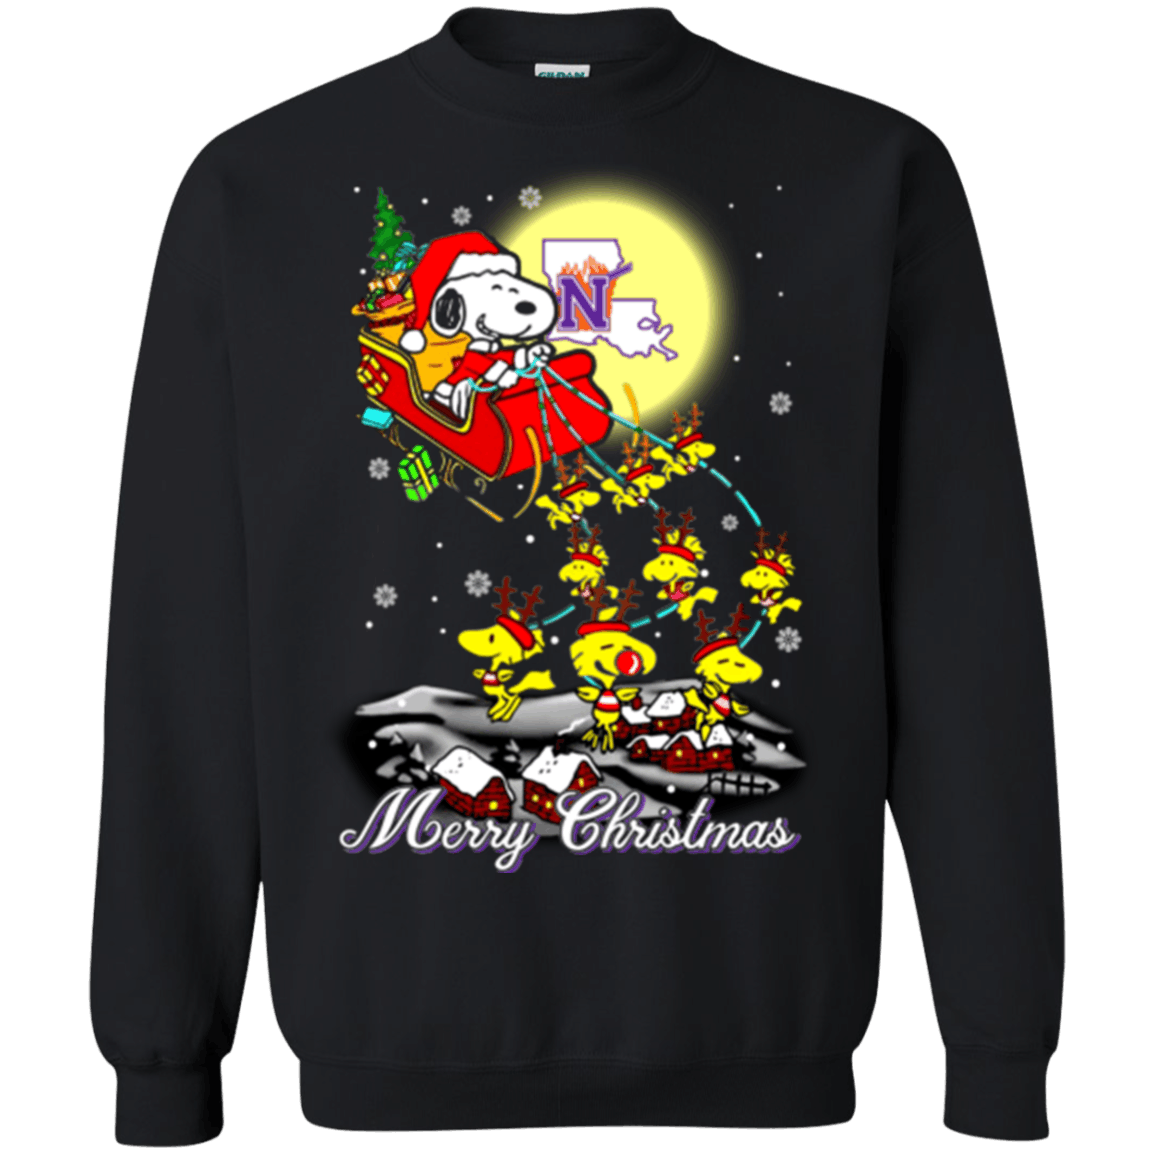 Awesome Northwestern State Demons Ugly Christmas Sweater 2023S Santa Claus With Sleigh And Snoopy Sweatshirts